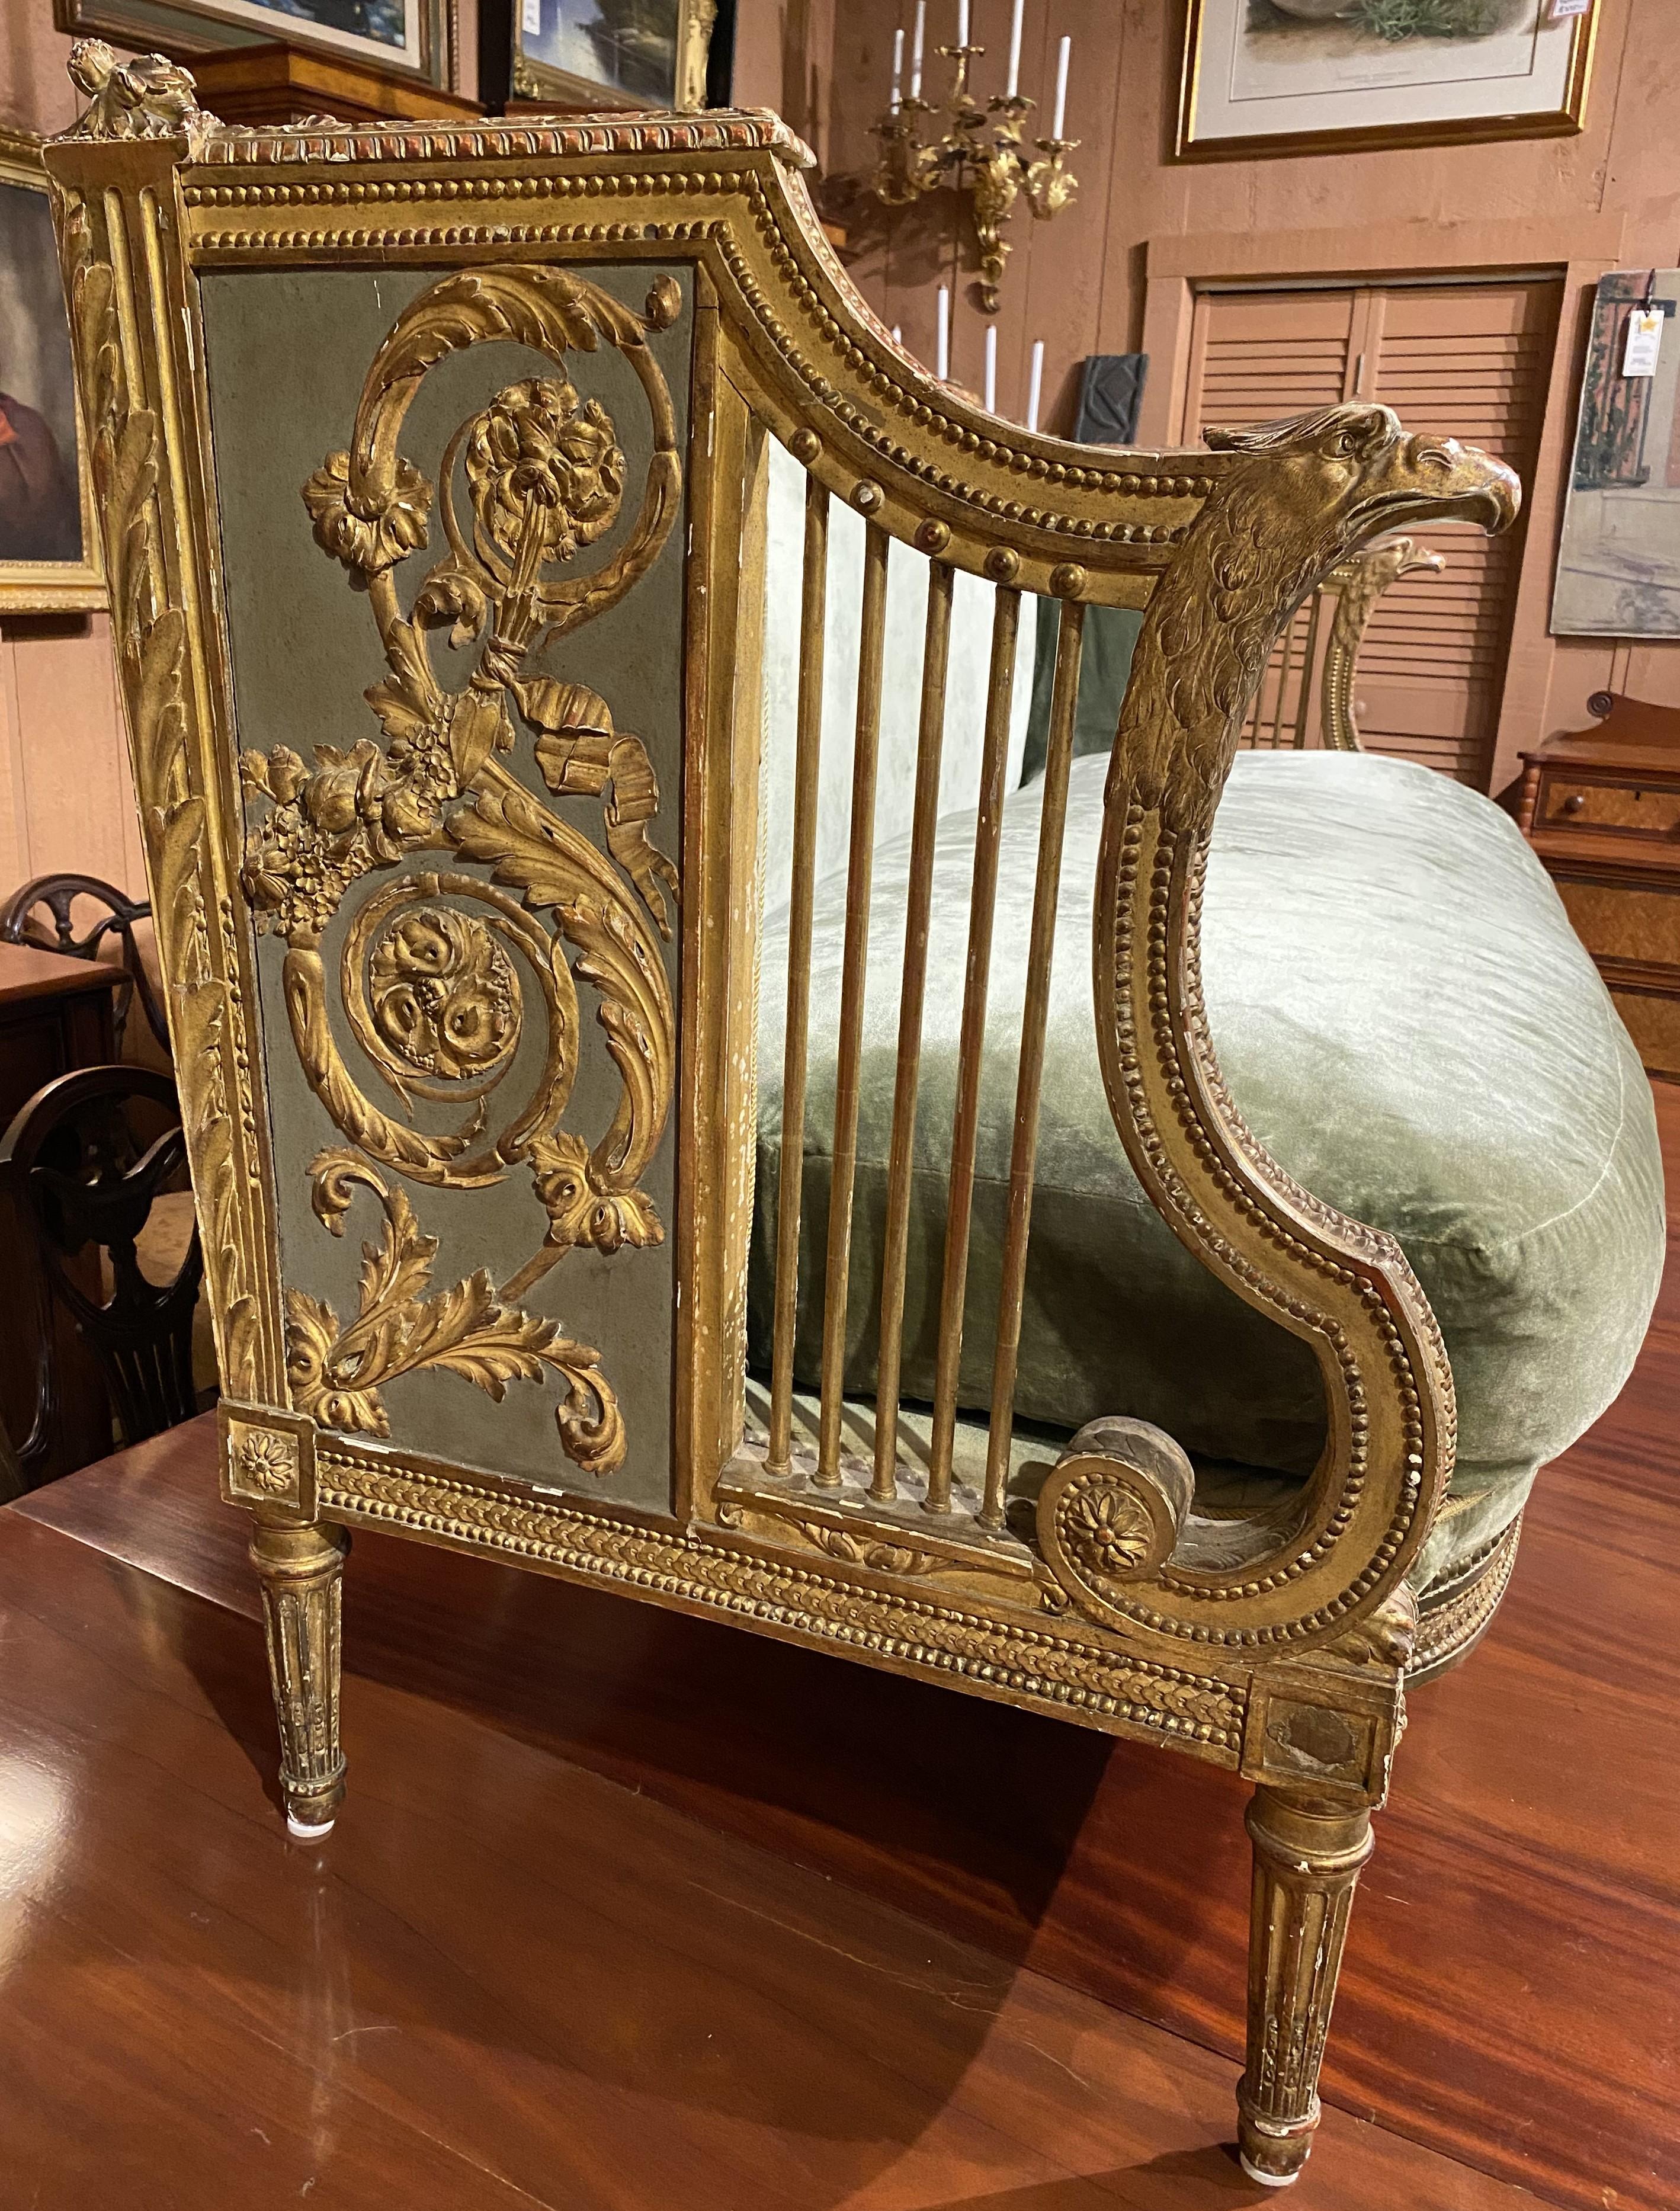 A fine example of a Louis XVI style giltwood settee with green upholstery, single seat pad,  carved crest rail, eagle form arms, scrollwork decoration, molding along the apron, side arm spindles, all supported by six carved round reeded tapered